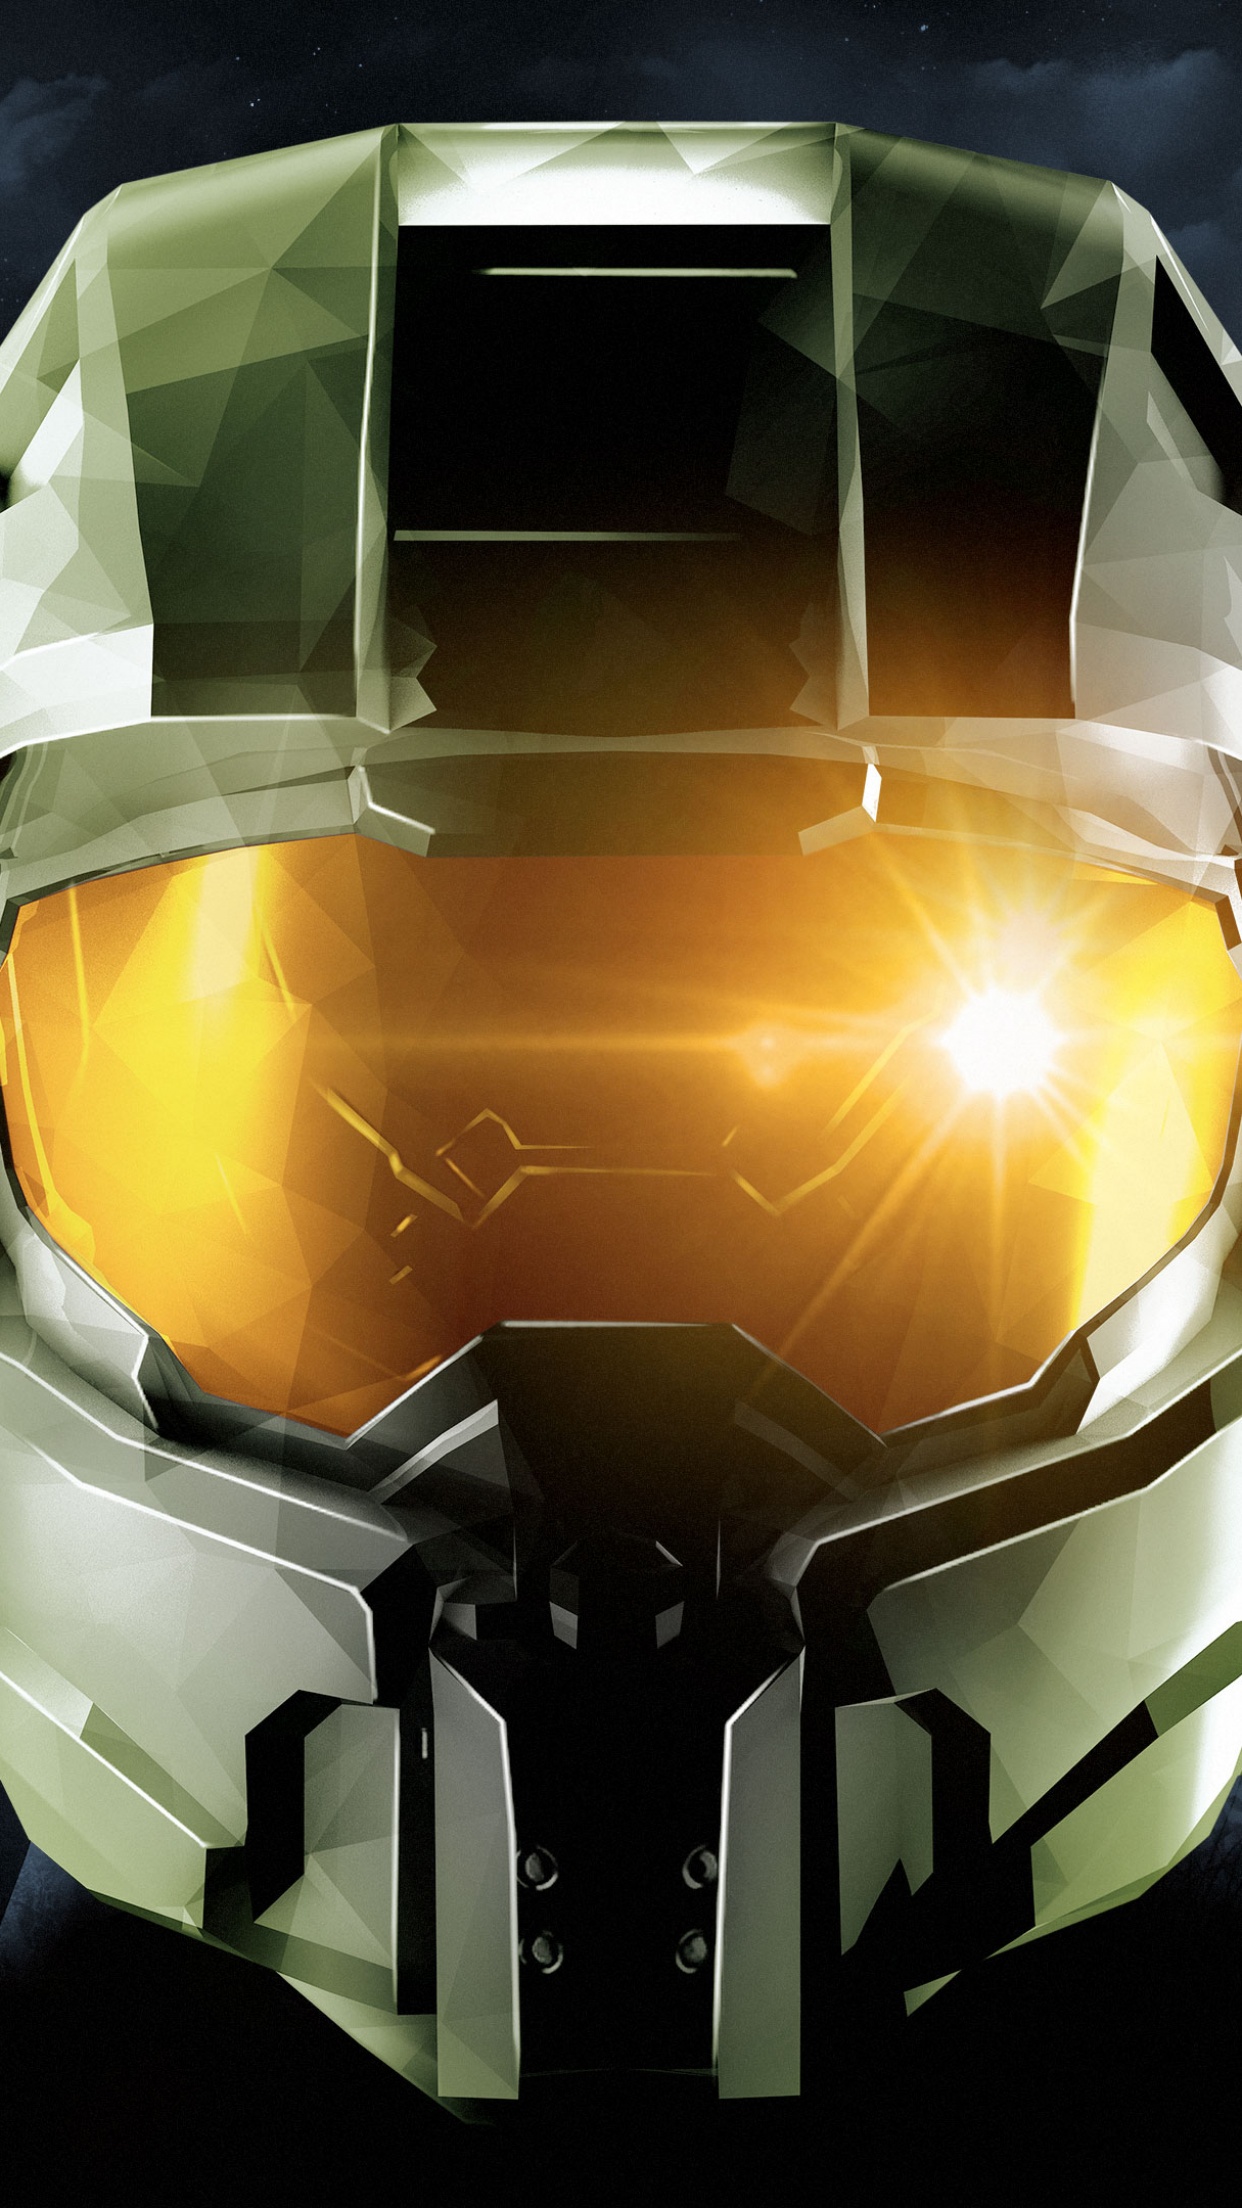 Halo: The Master Chief Collection Wallpaper 4K, Xbox One, PC Games